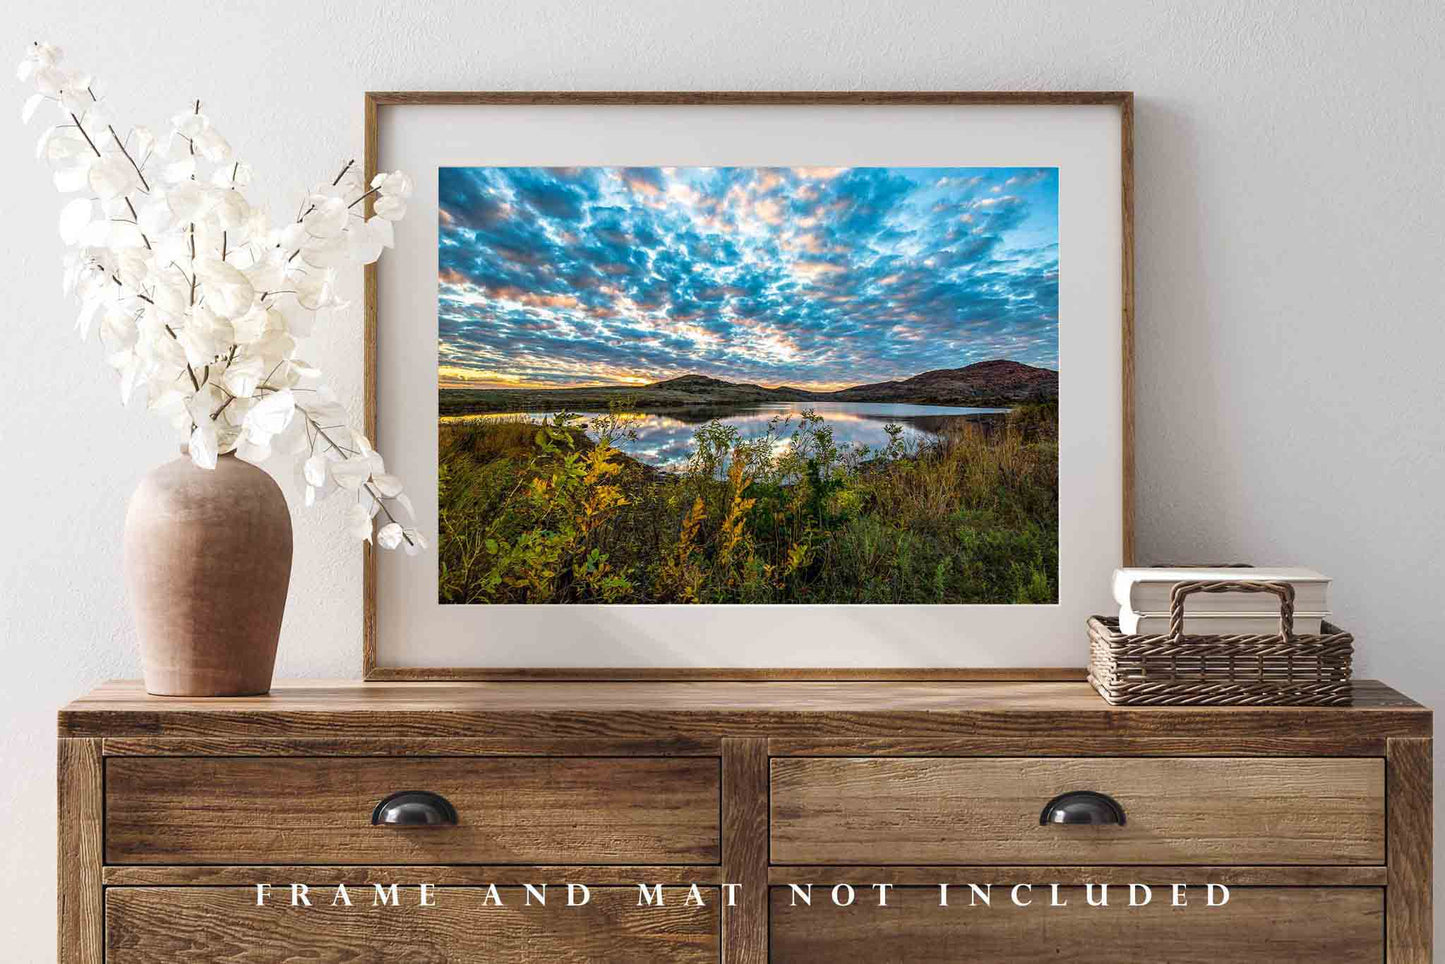 Wichita Mountains Photography Print (Not Framed) Picture of Scenic Sky Over Lake at Sunset on Autumn Evening in Oklahoma Great Plains Wall Art Nature Decor